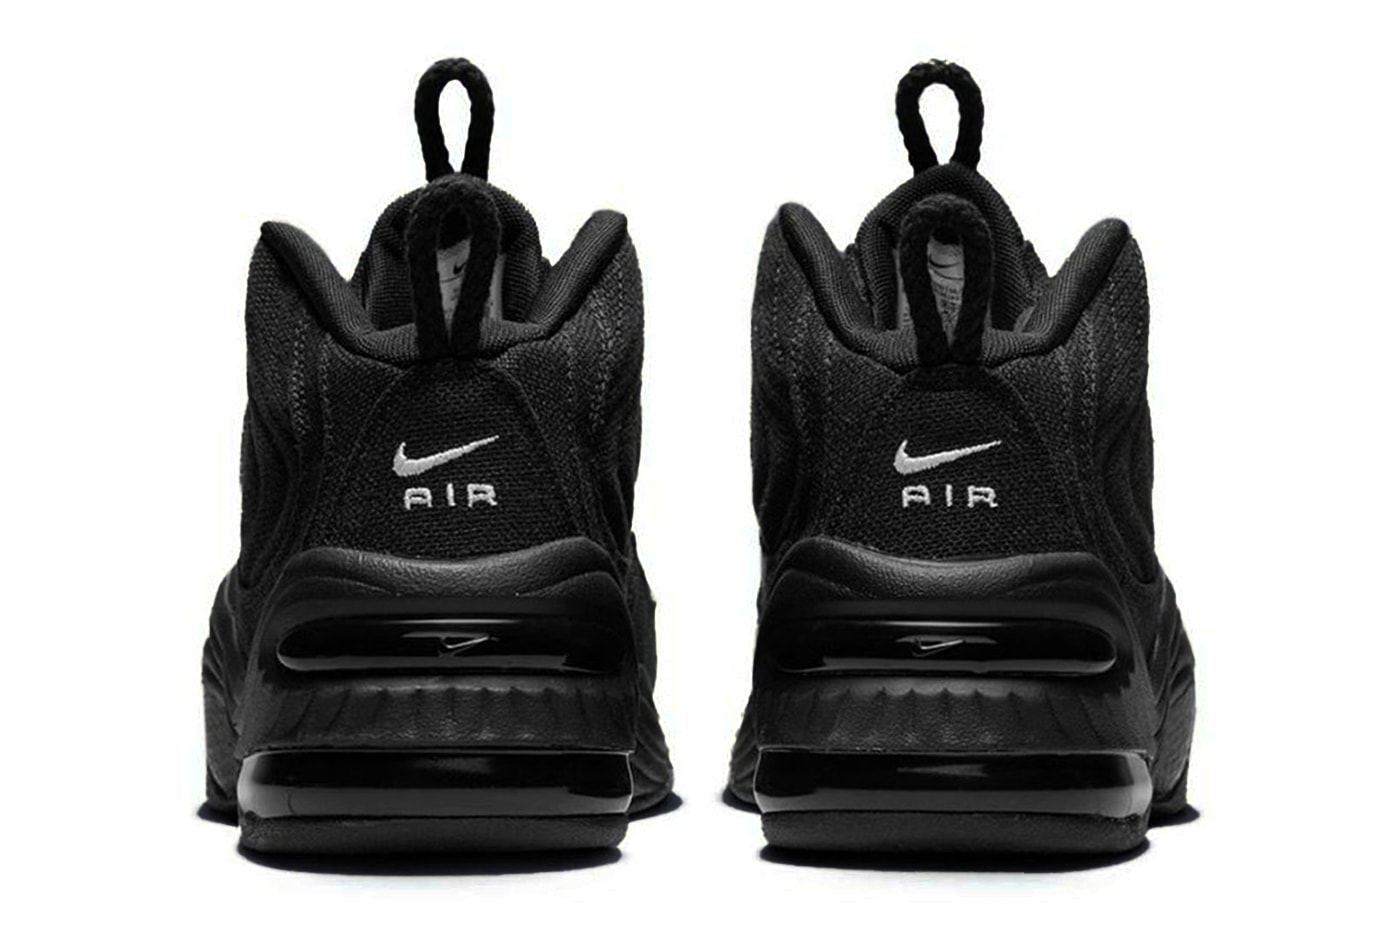 Stussy Nike Air Max Penny 2 Collaboration Official Images Release Info